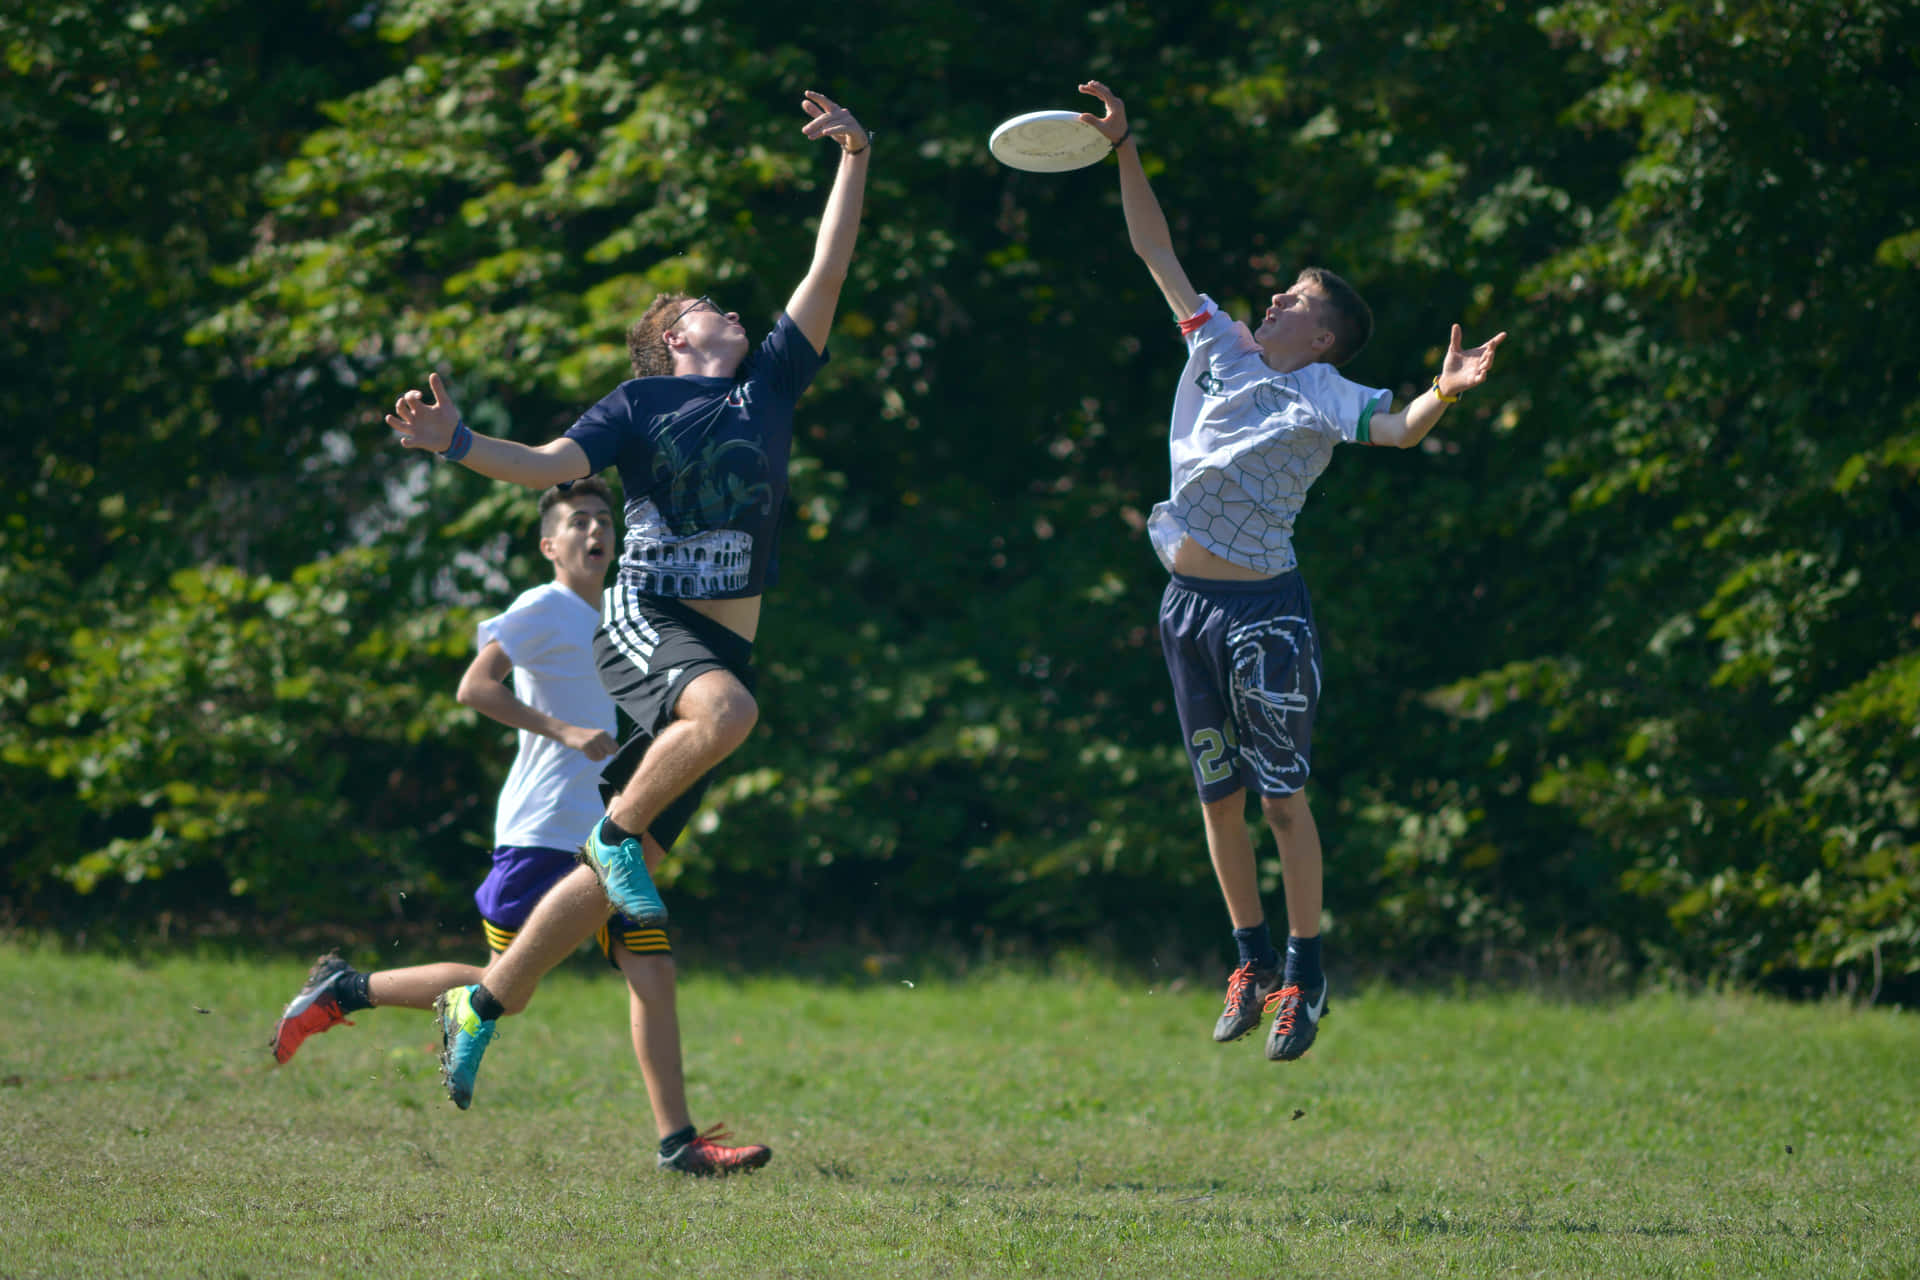 Captivating 1080p Ultimate Frisbee in Flight